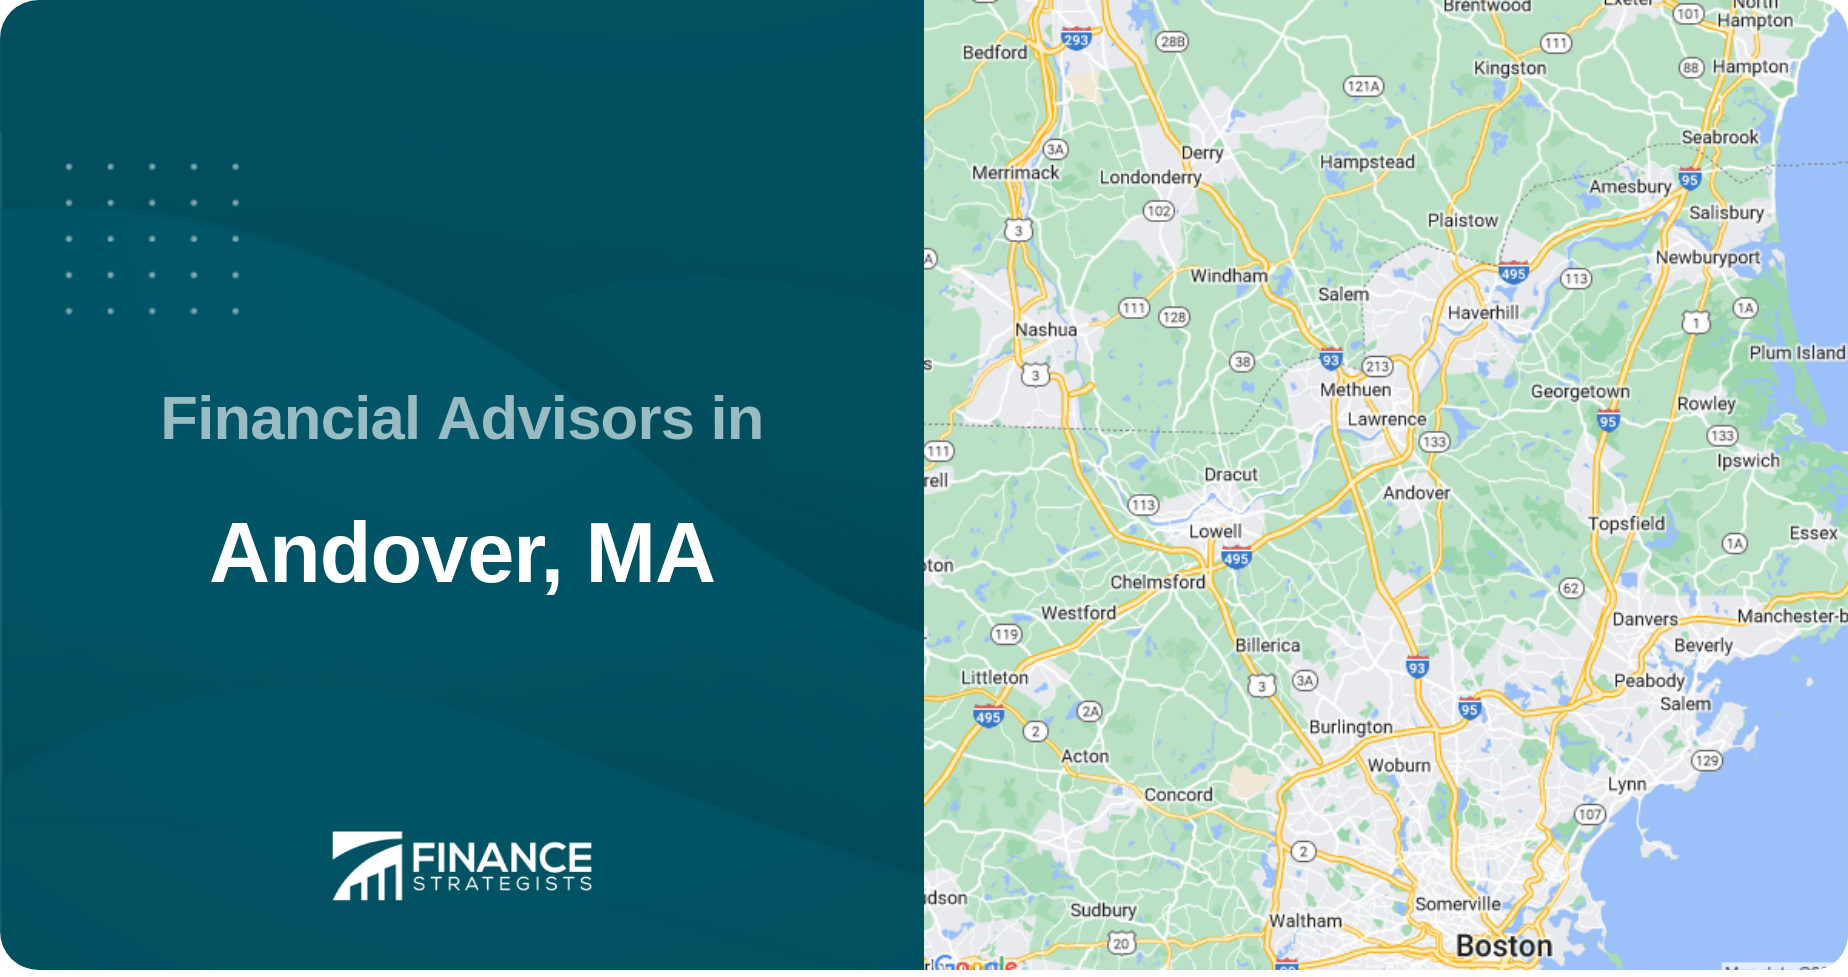 Financial Advisors in Andover, MA